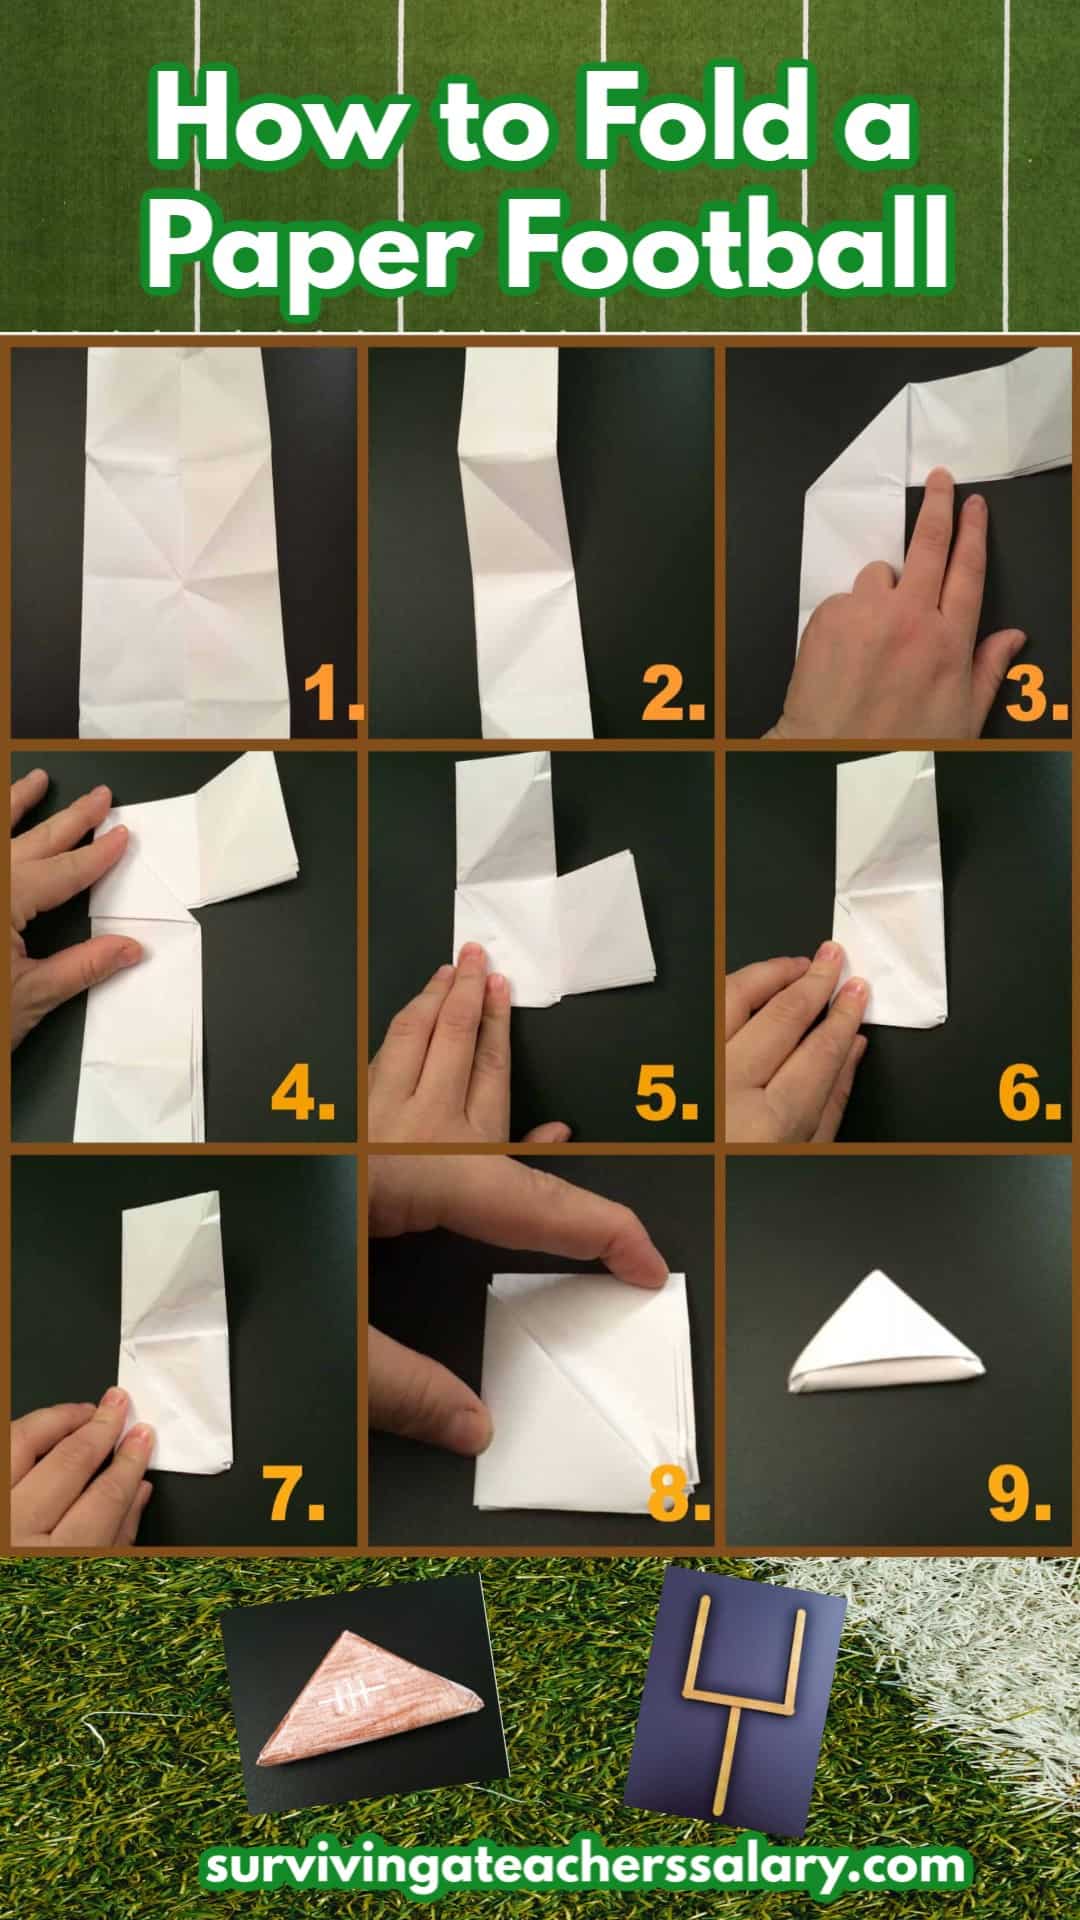 How to Make a Paper Football Tutorial + Football Game Instructions